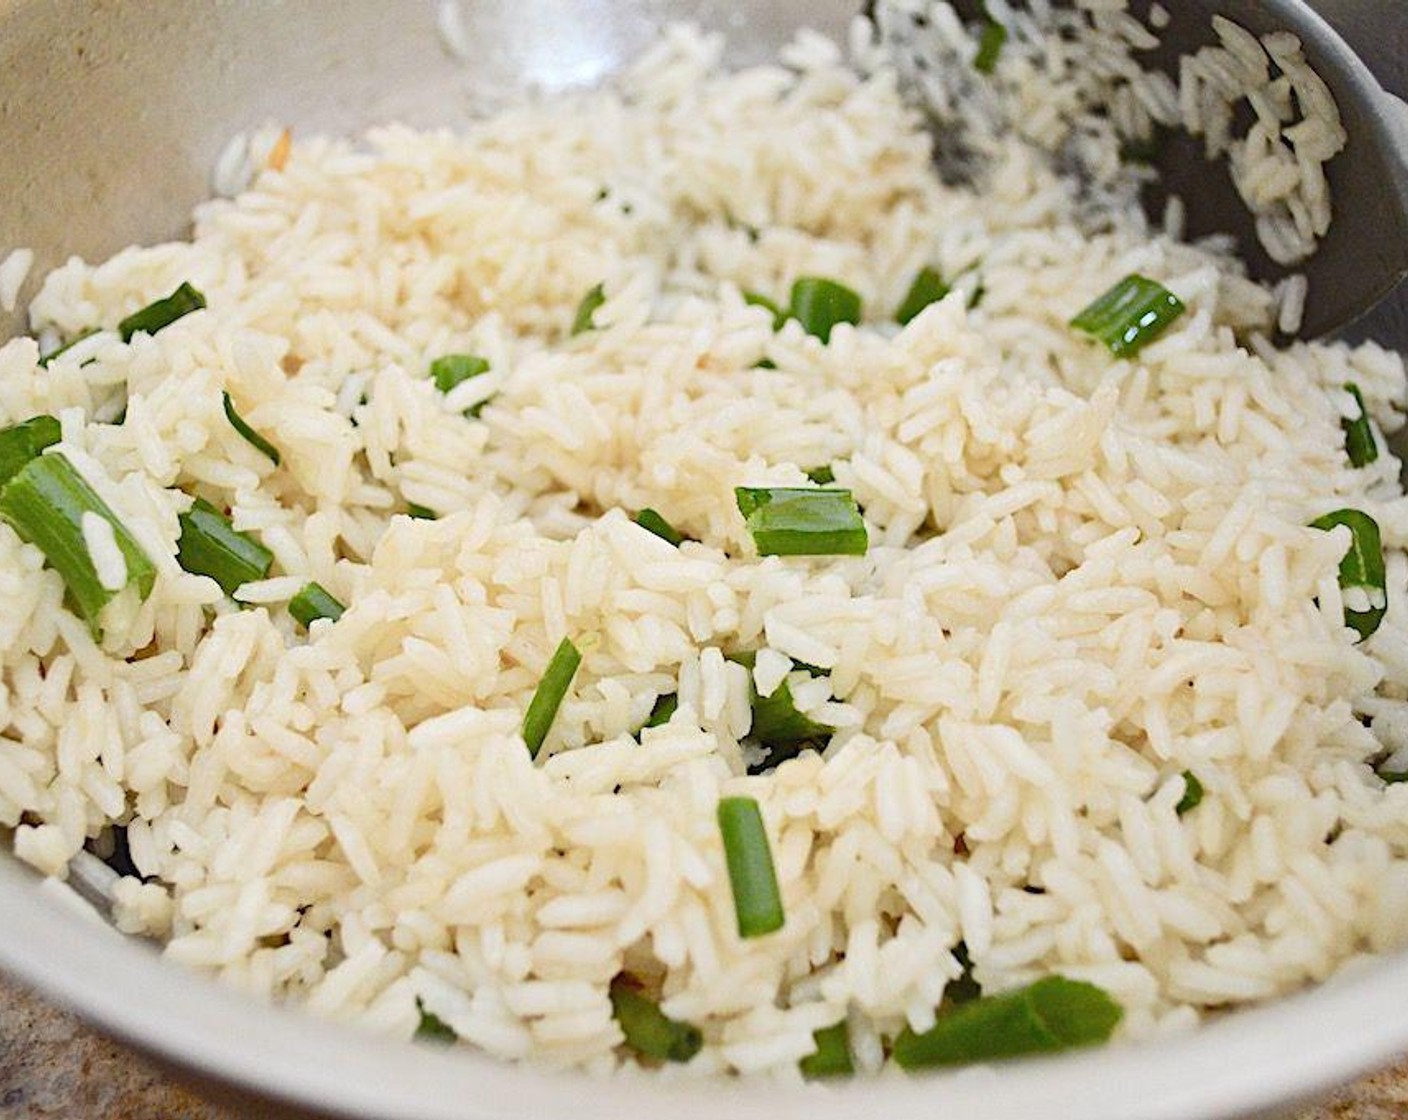 step 4 Let the rice cook until tender for about 15 to 20 minutes. When it is done, stir in the Scallion (1/2 cup) and let them get fragrant in the hot rice.